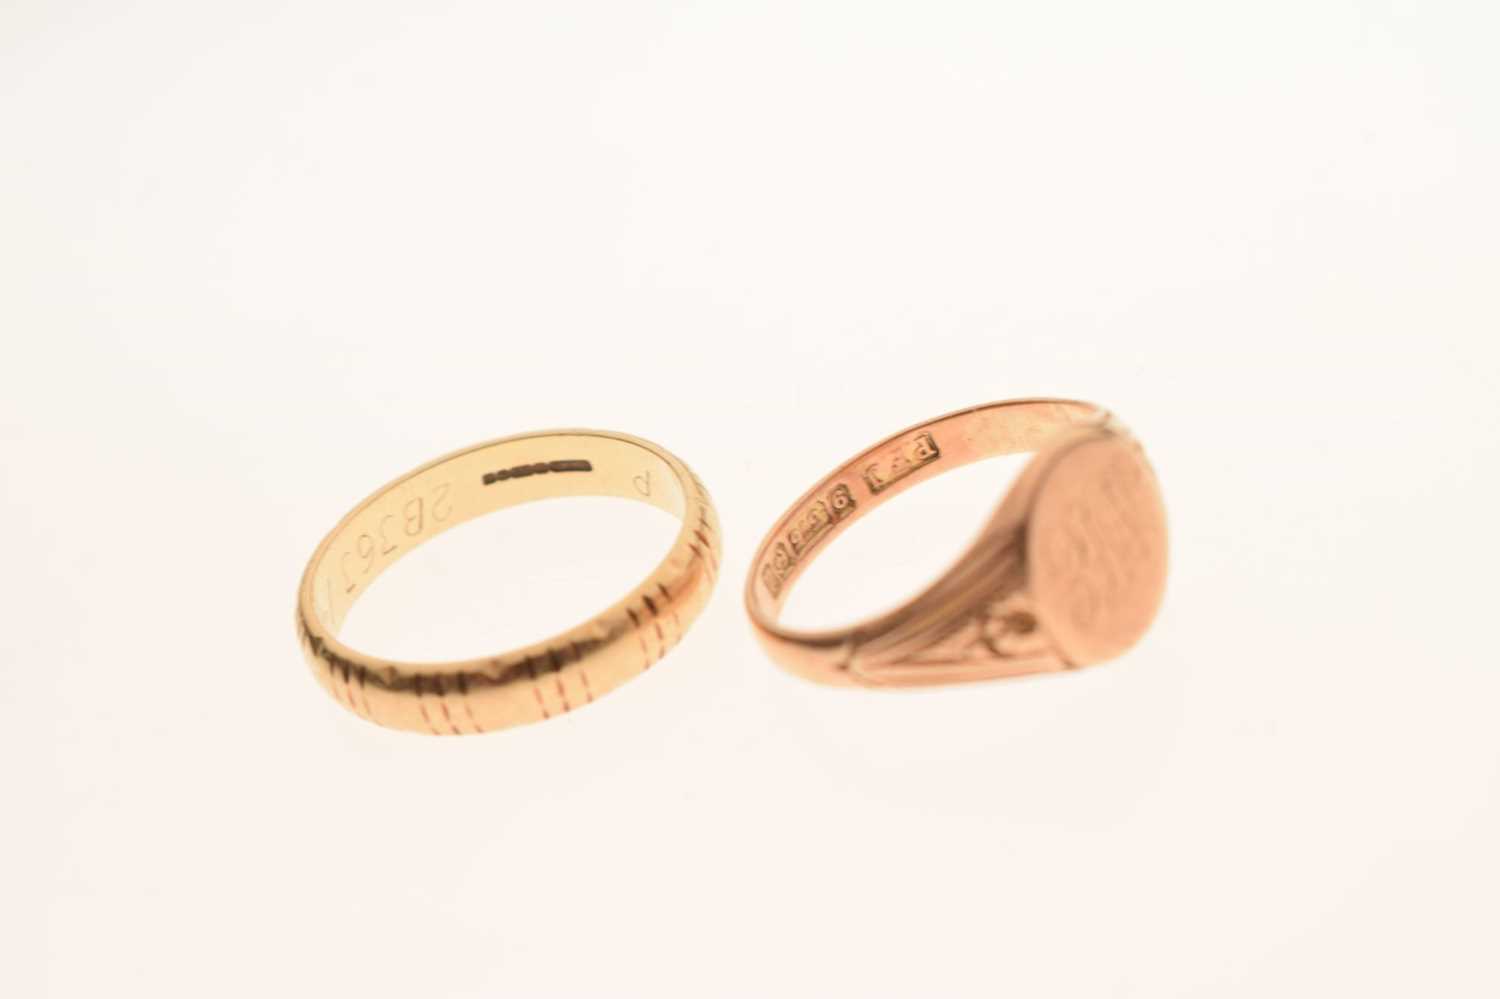 Early 20th century 9ct gold signet ring, and 9ct gold wedding band - Image 6 of 6